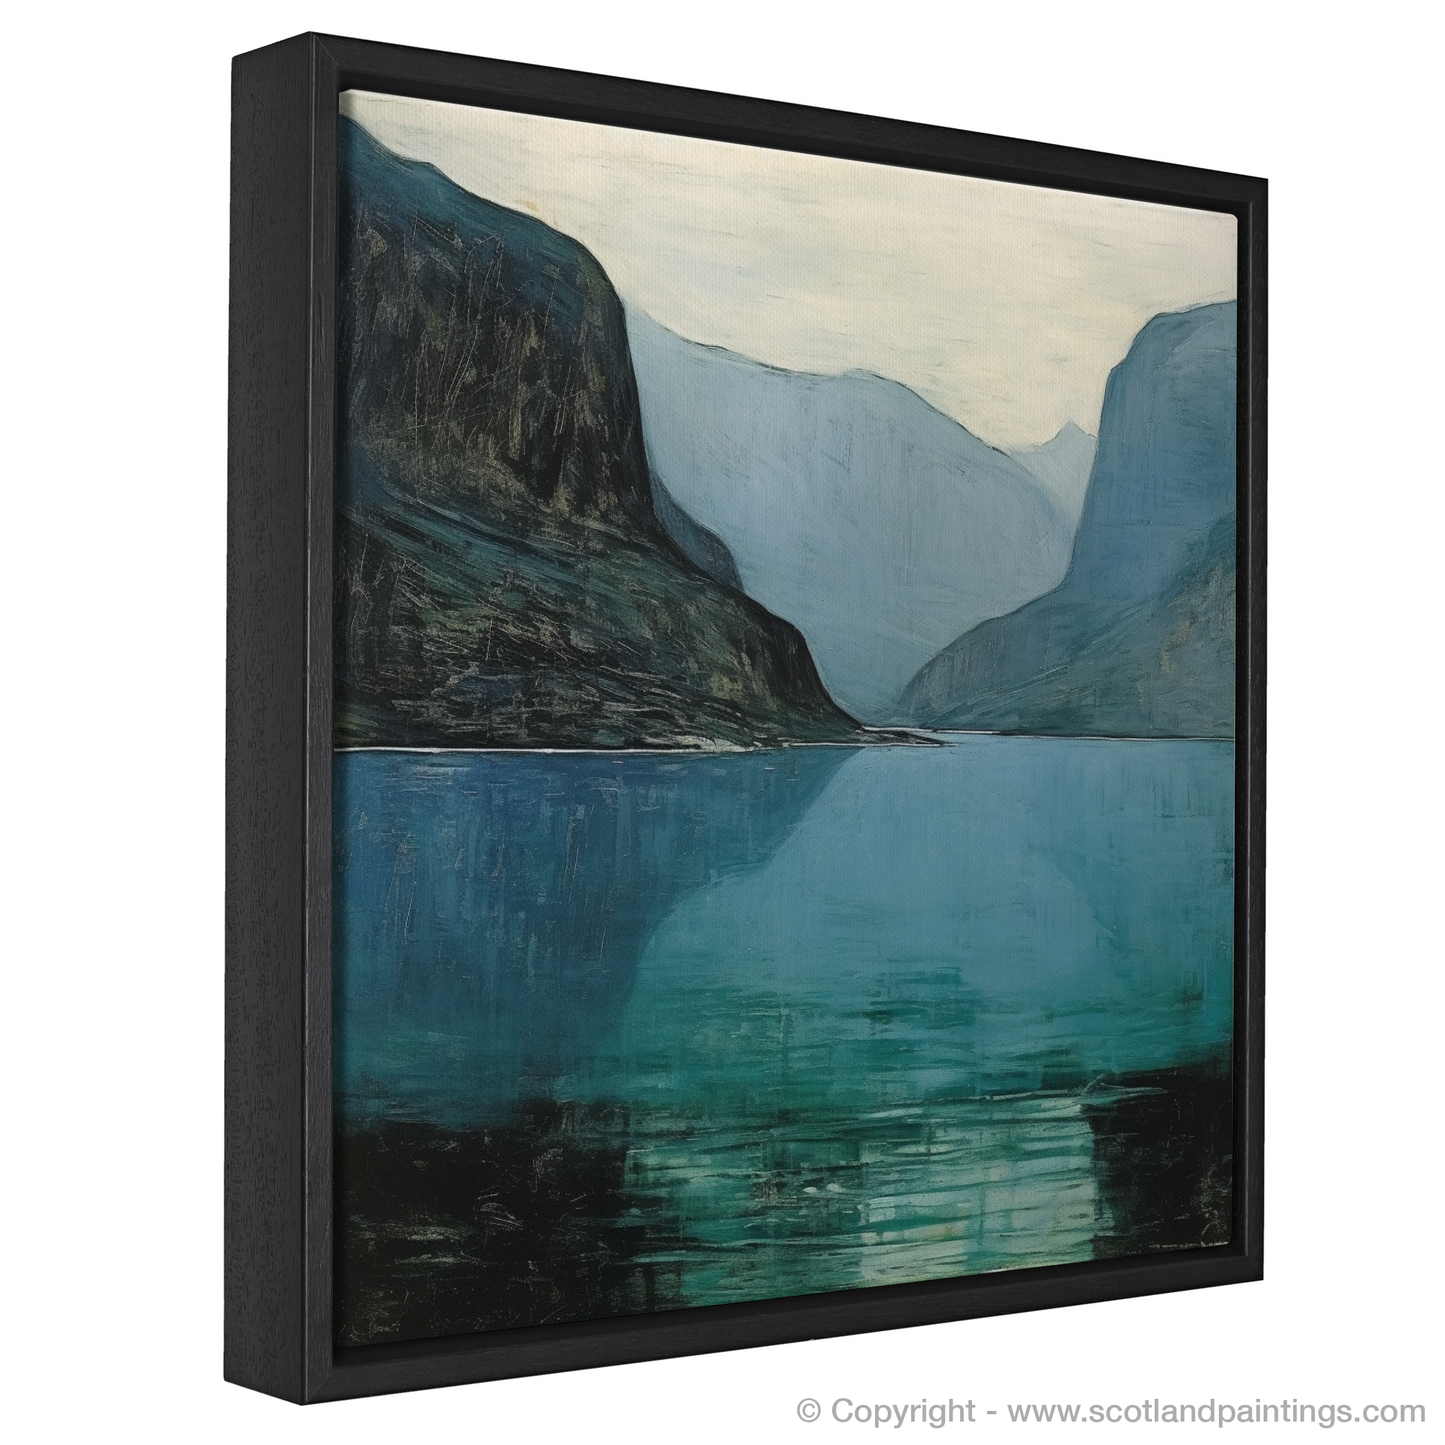 Tranquil Waters of Loch Maree: A Naive Art Tribute